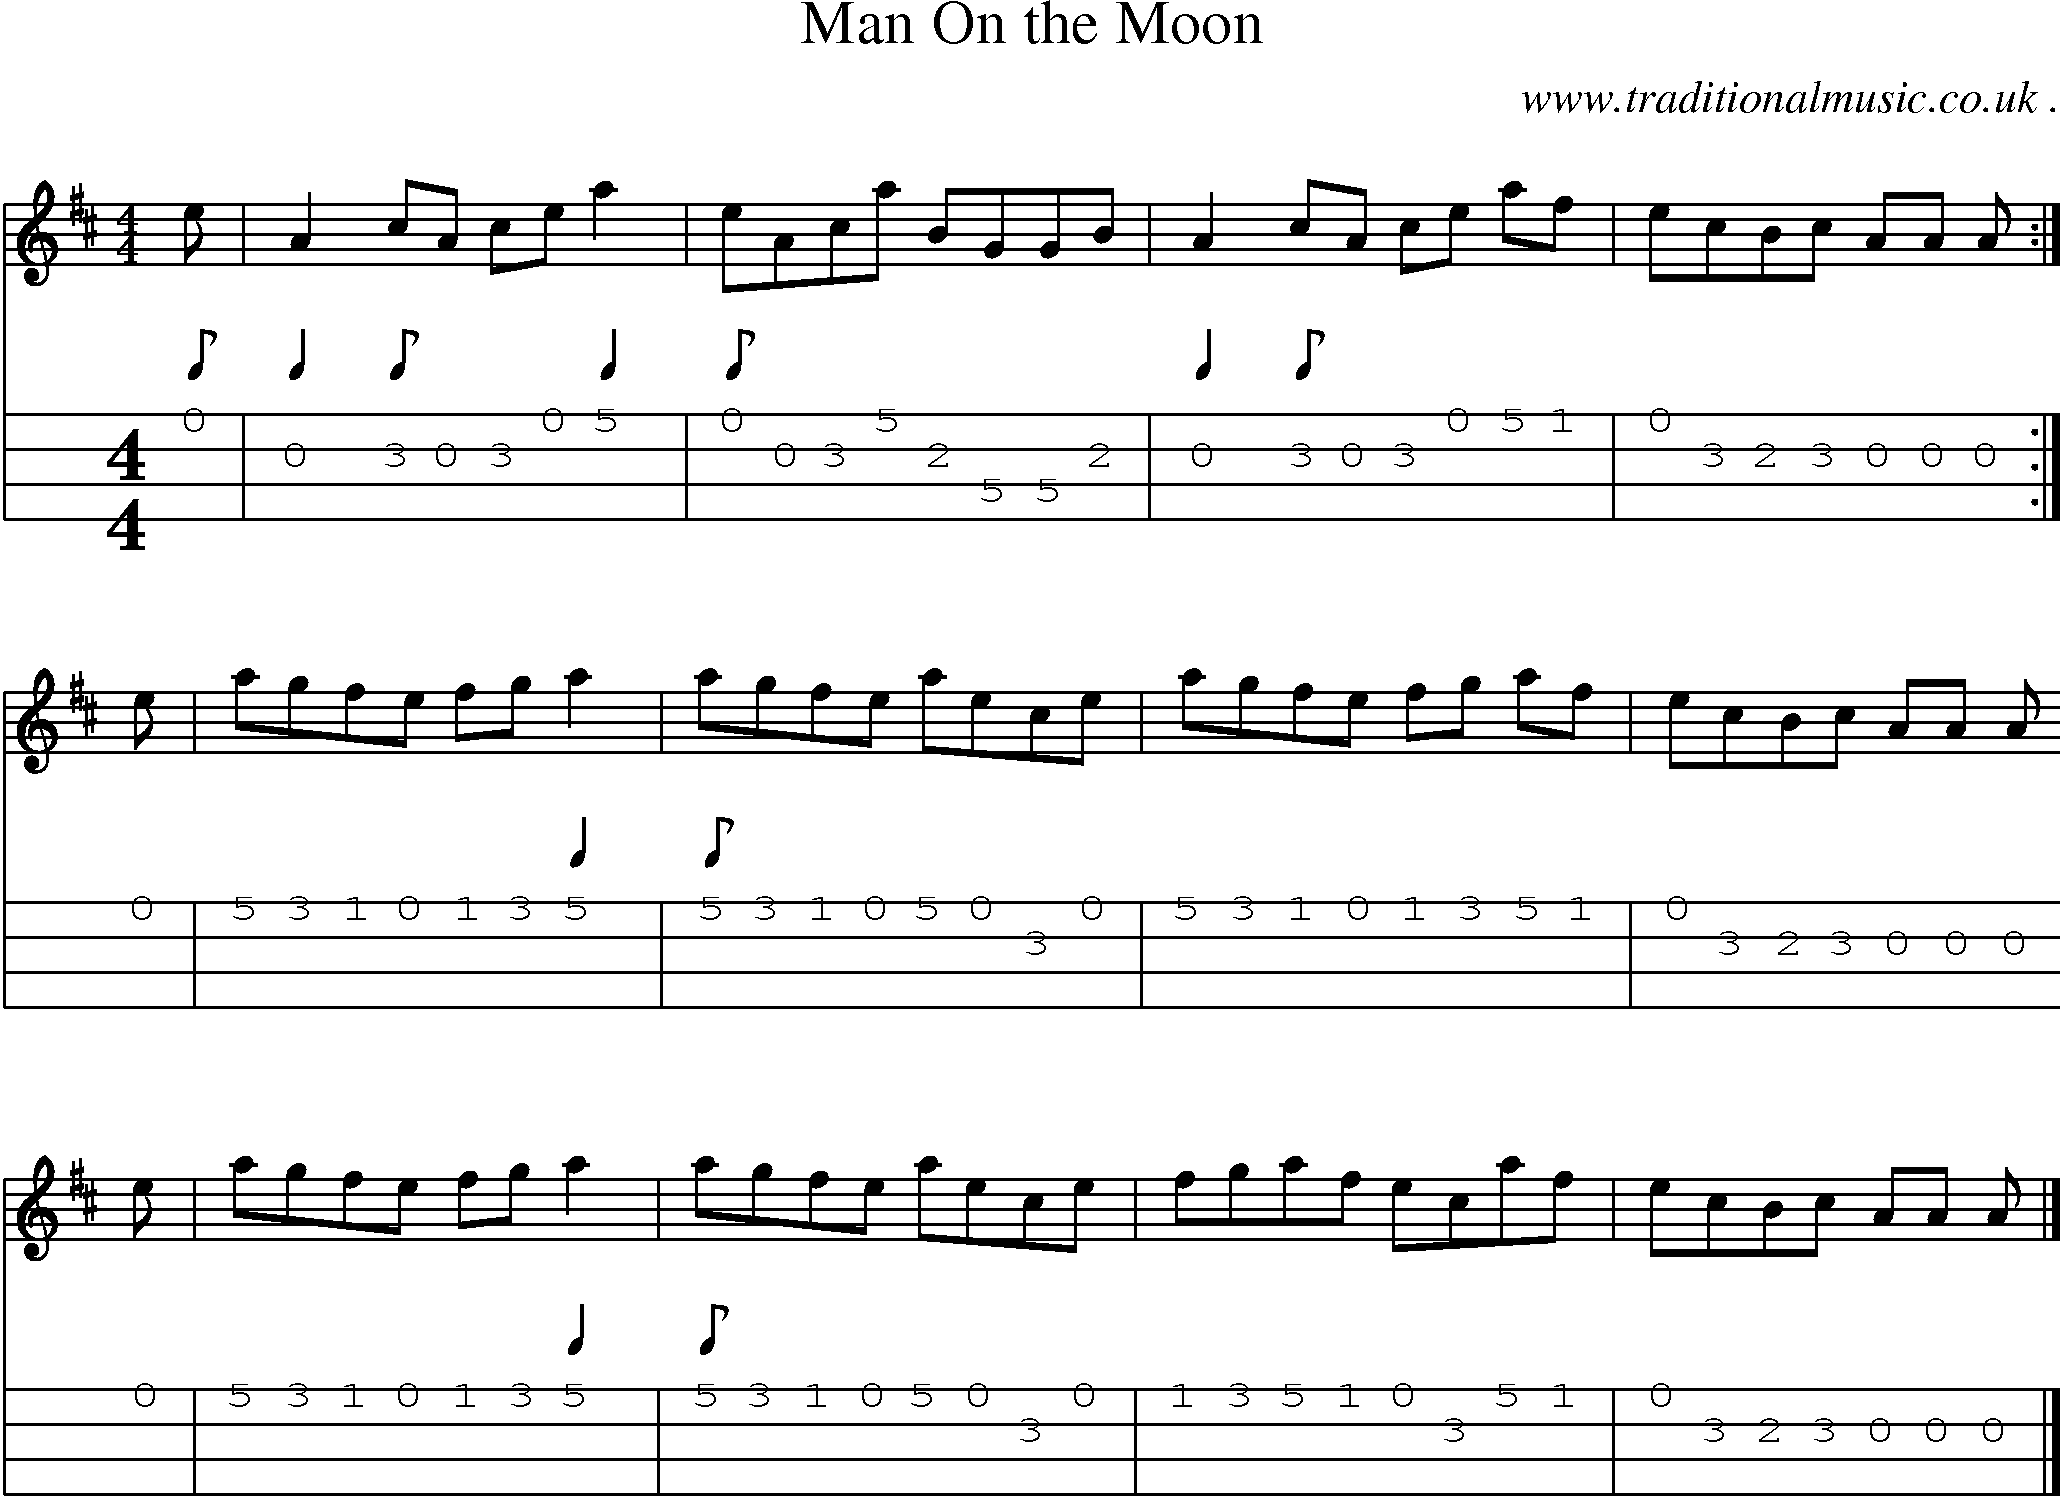 Sheet-music  score, Chords and Mandolin Tabs for Man On The Moon